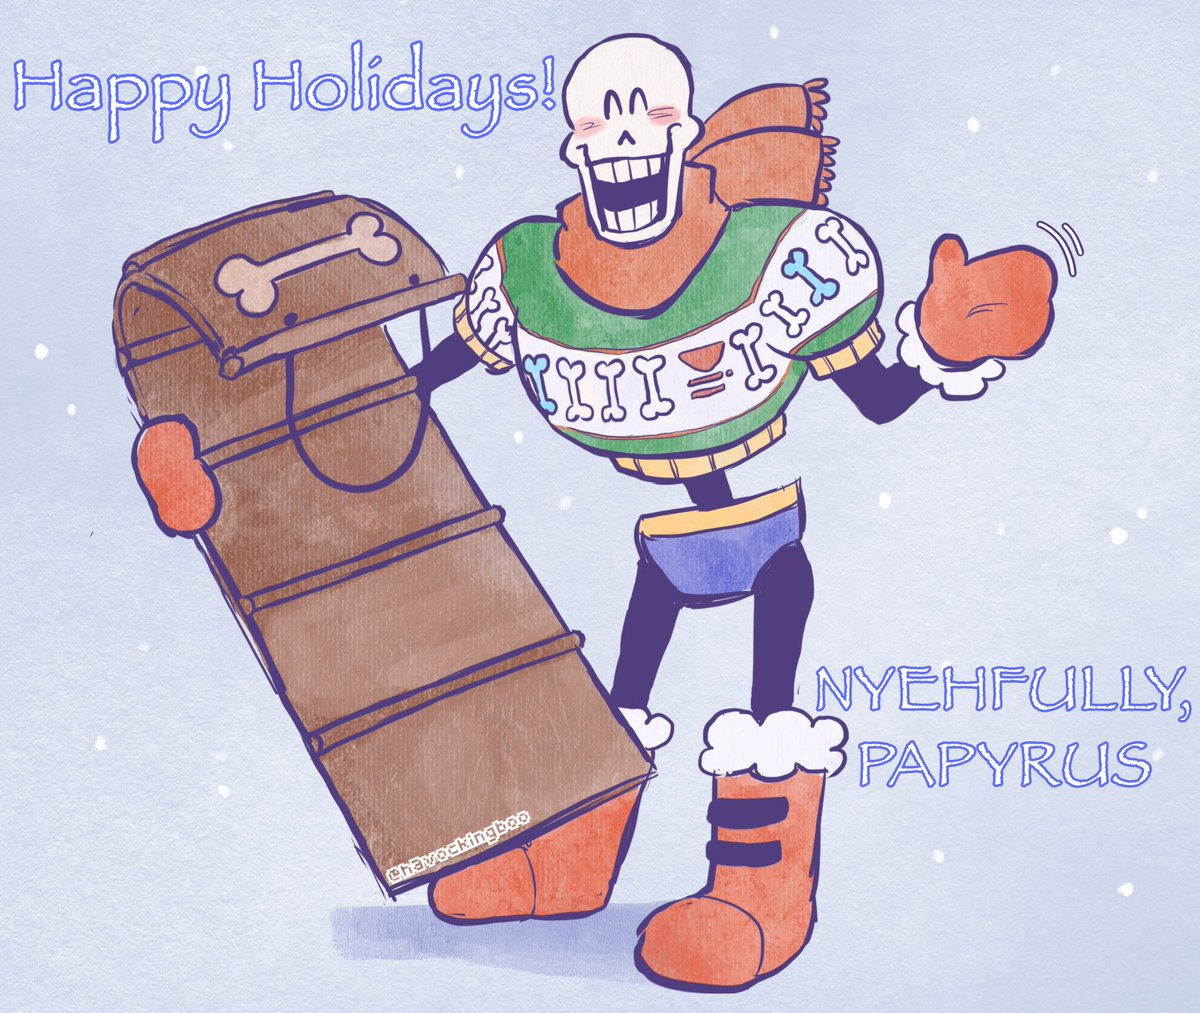 How we feeling about the new Undertale Newsletter fellas
#undertale #papyrus #papyrusundertale